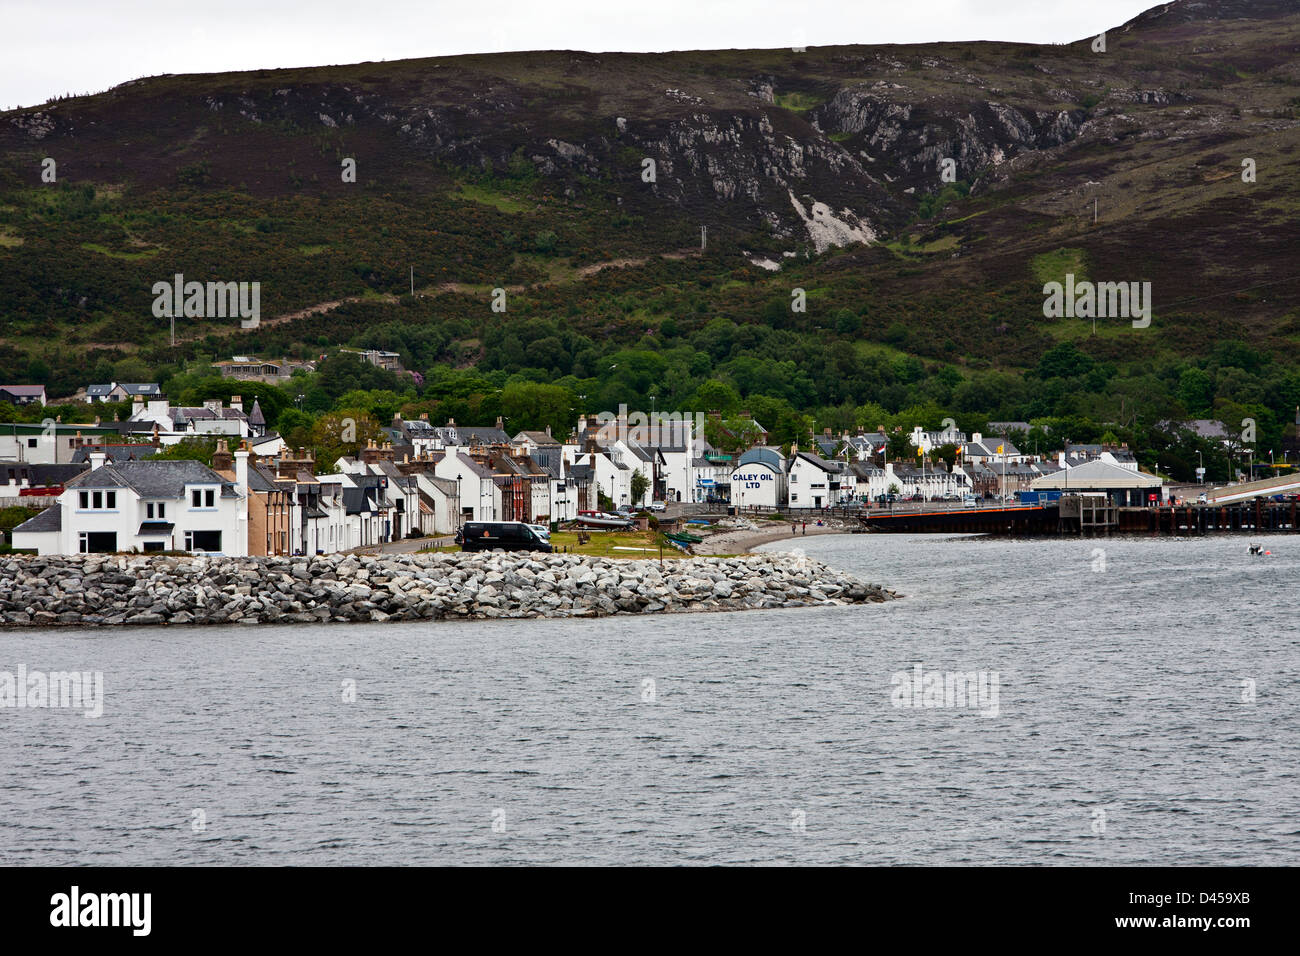 The town of Ullapool on the west coast of Scotland was founded in the late 18th and early 19th c. as a fishing port. Stock Photo